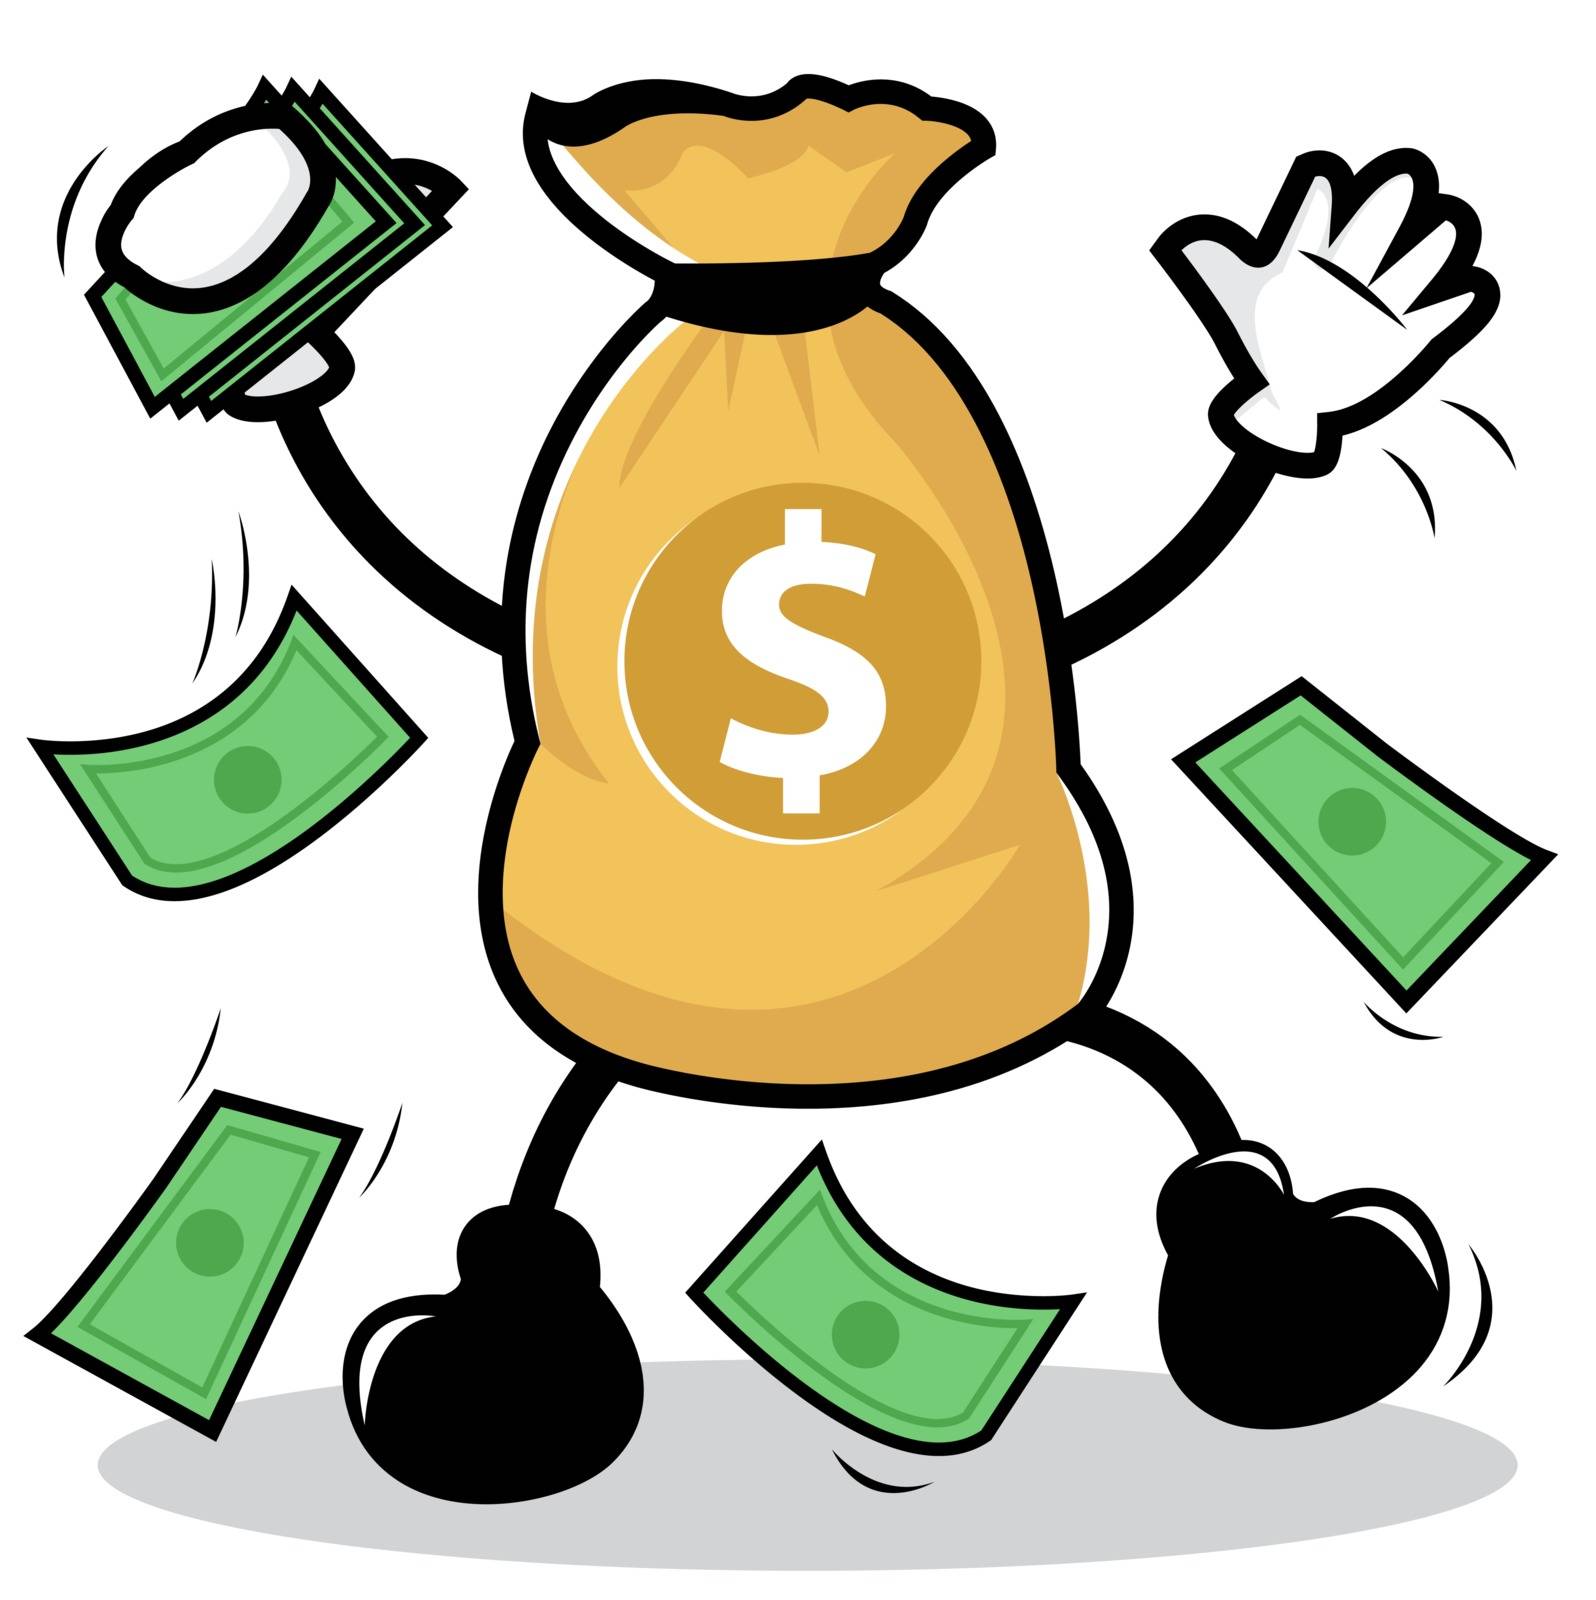 Illustration of Money Bag Character Holding Money by Ianisme28